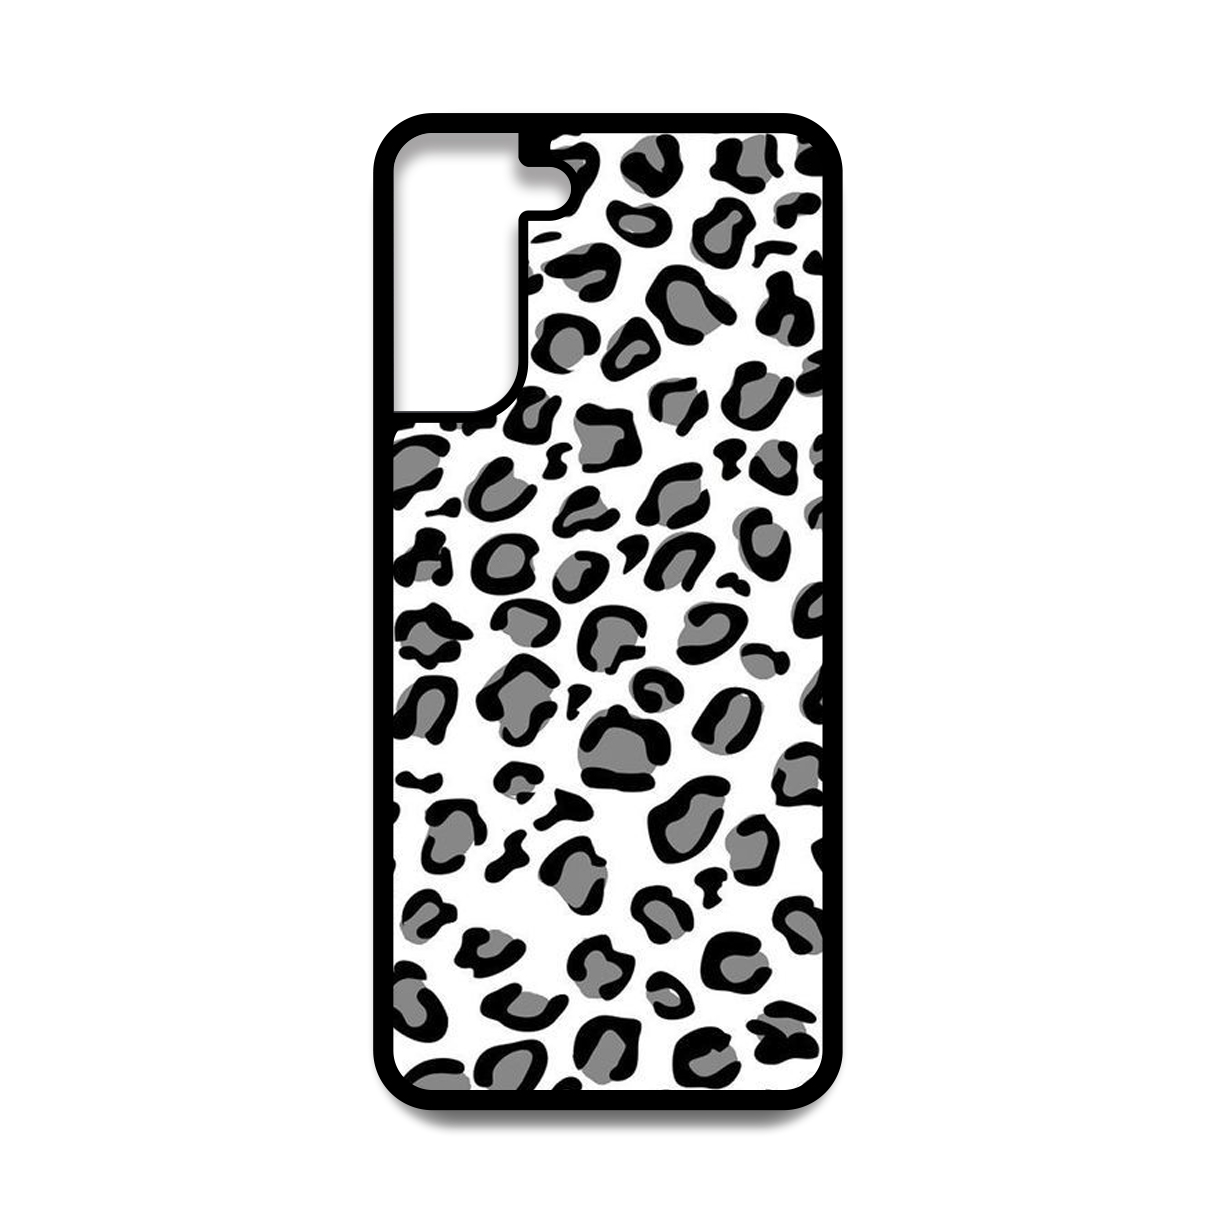 Caitscases TPU Fashion Covers - Samsung Galaxy S21 (Black and White Leopard)